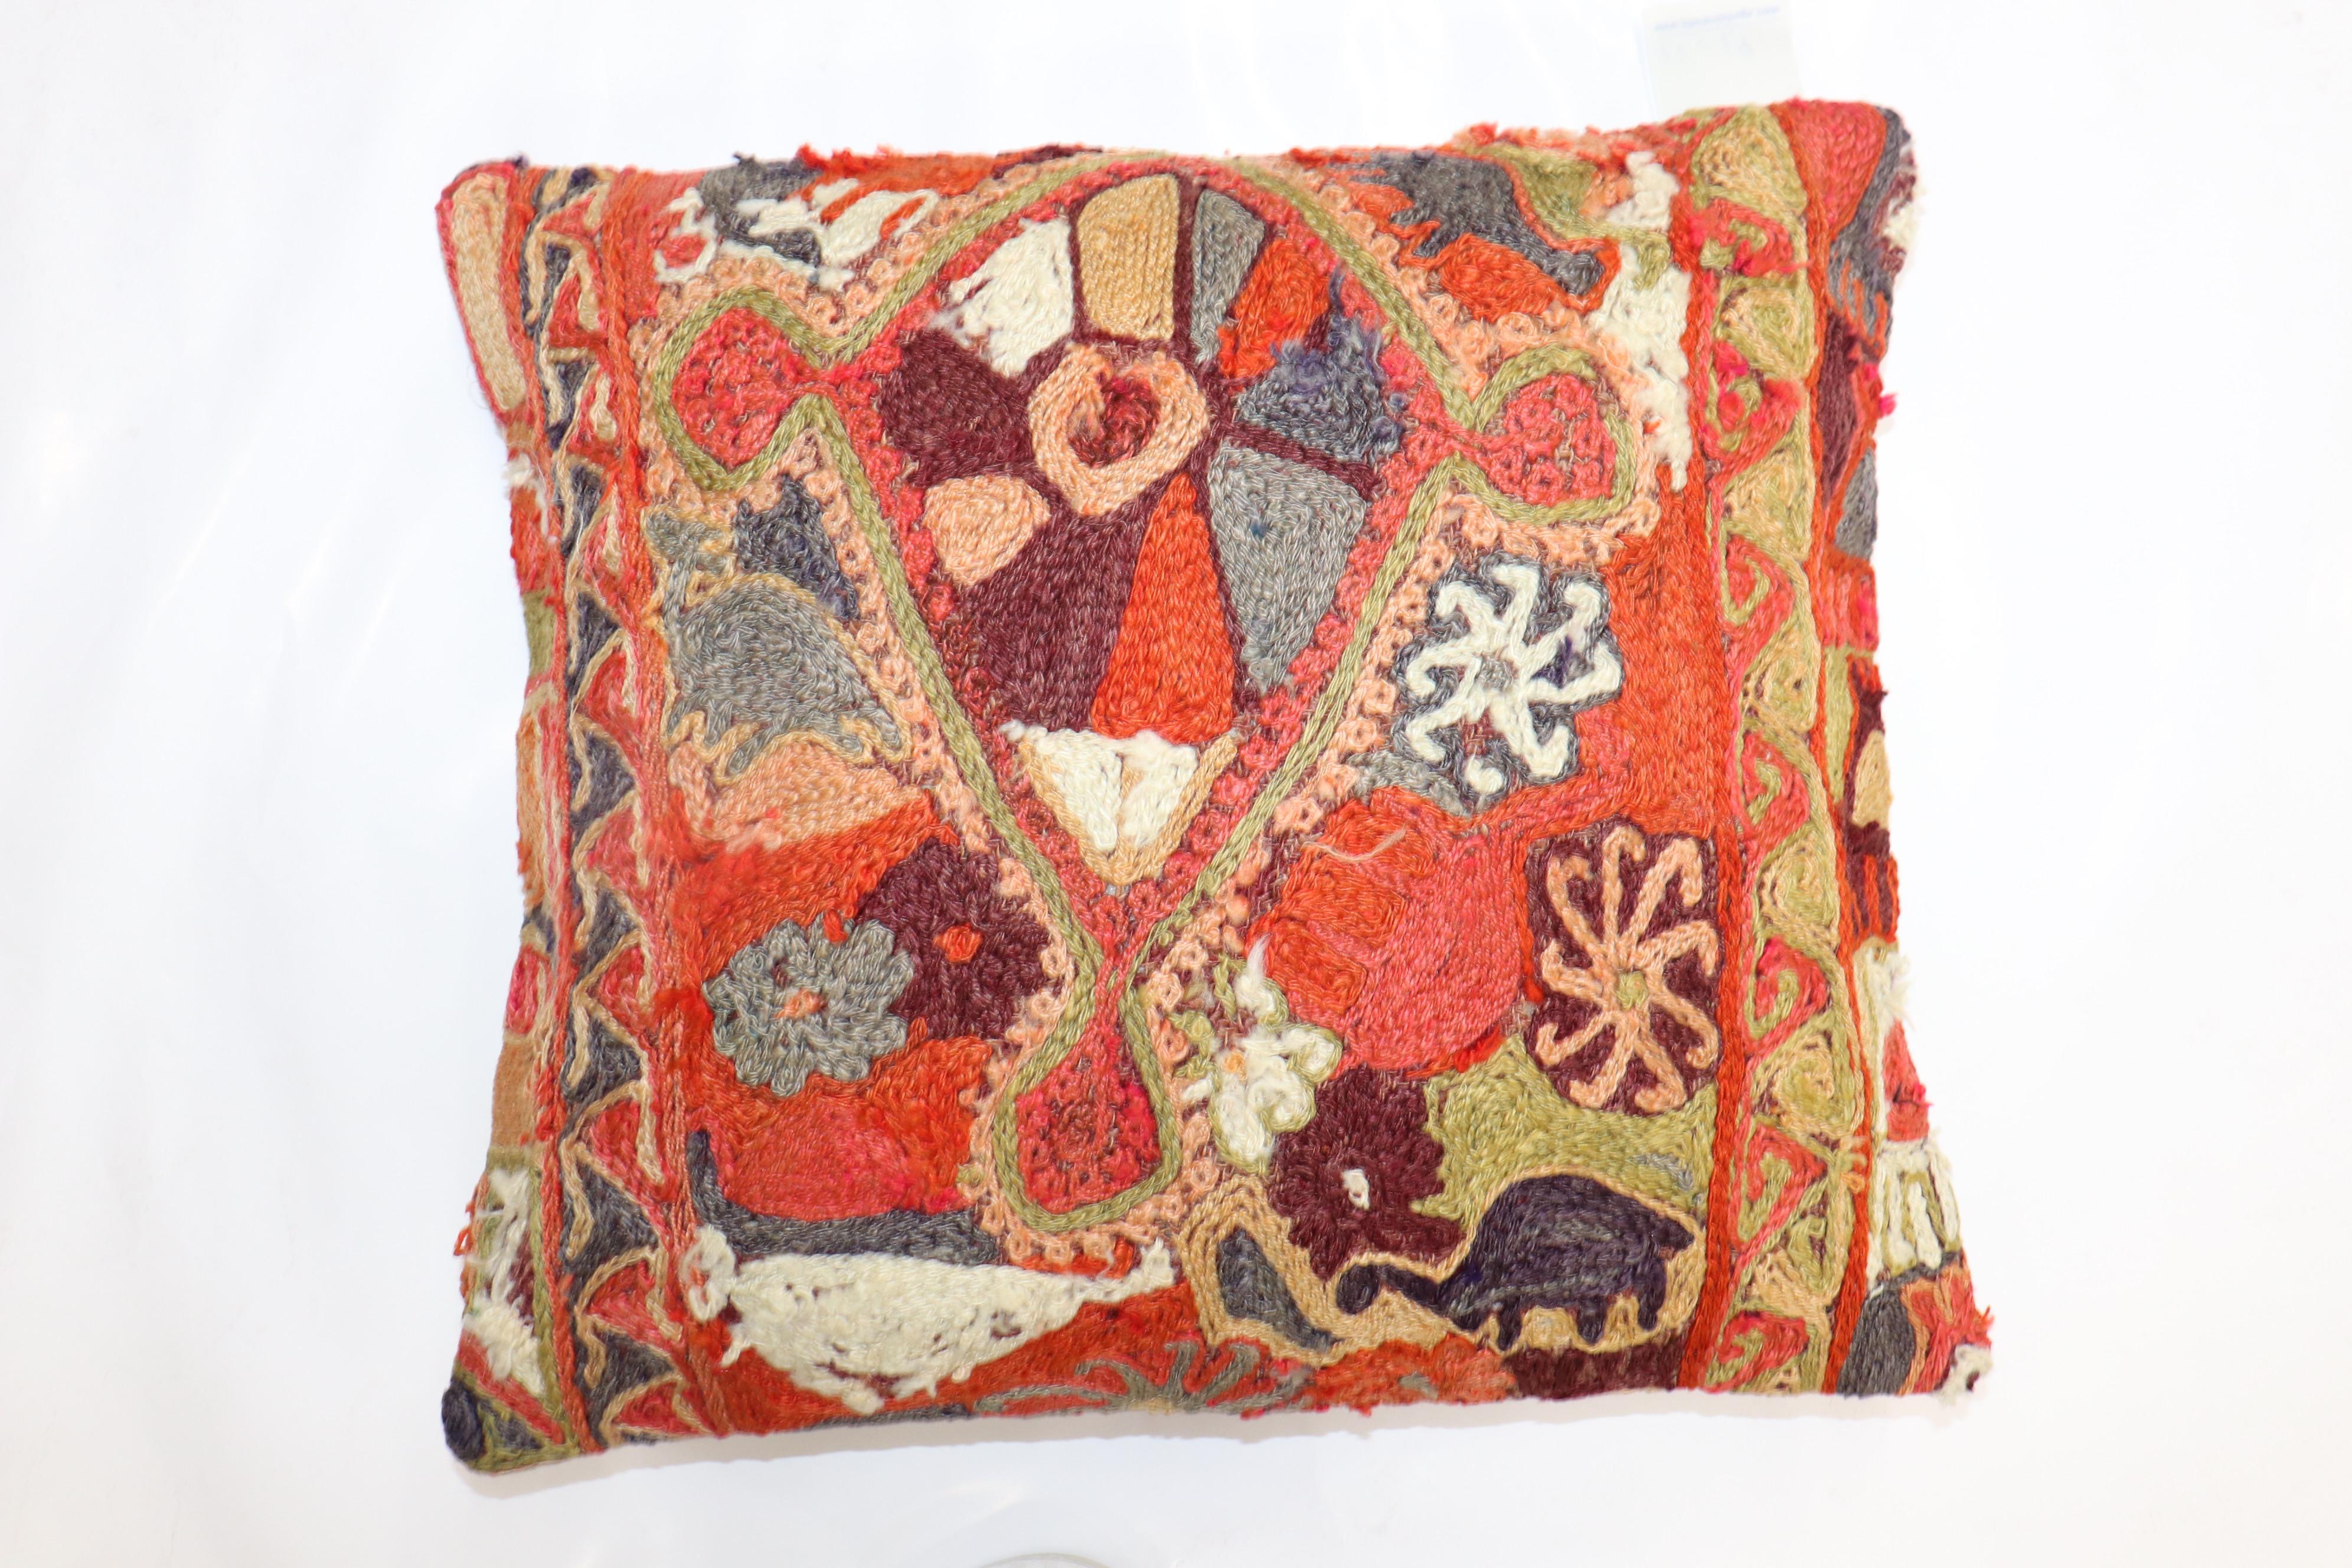 Pillow made from a chain stitch african textile. Cotton backing, polyfill insert provided

18'' x 21''